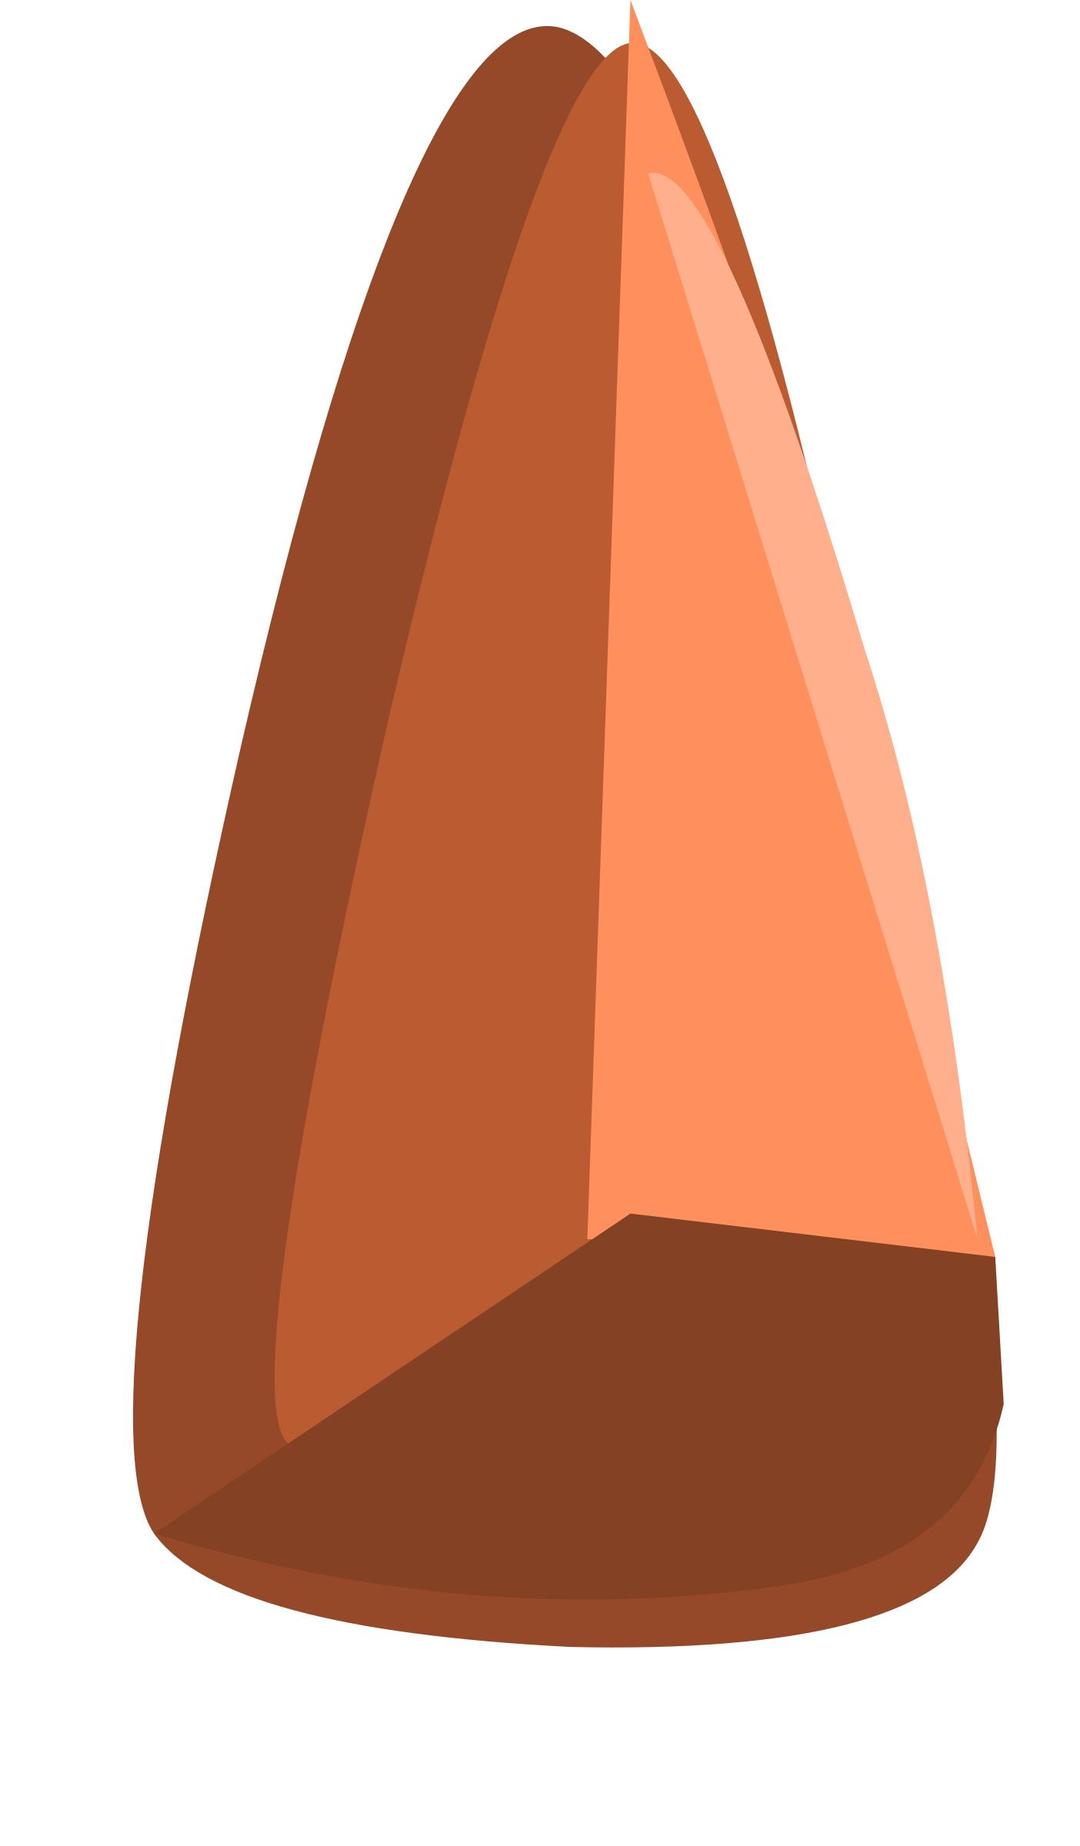 Avatar Vanity Nose Triangle png transparent